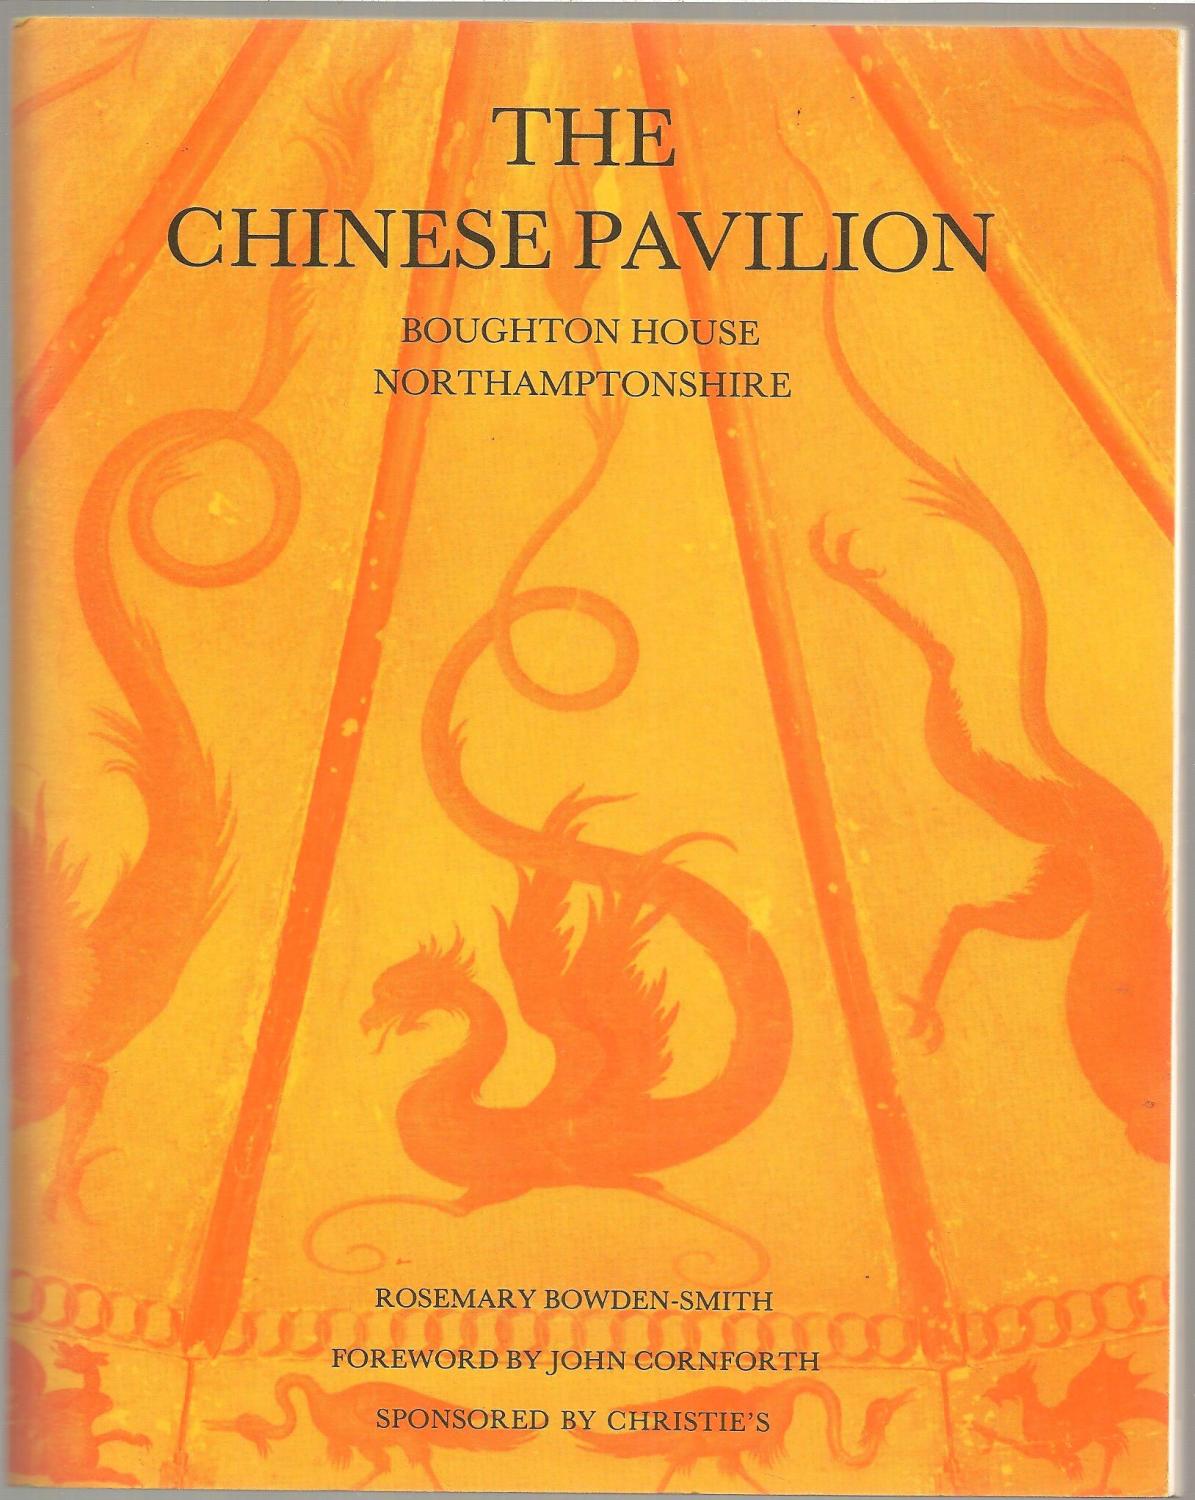 The Chinese Pavilion Boughton House Northamptonshire - Bowden-Smith, Rosemary